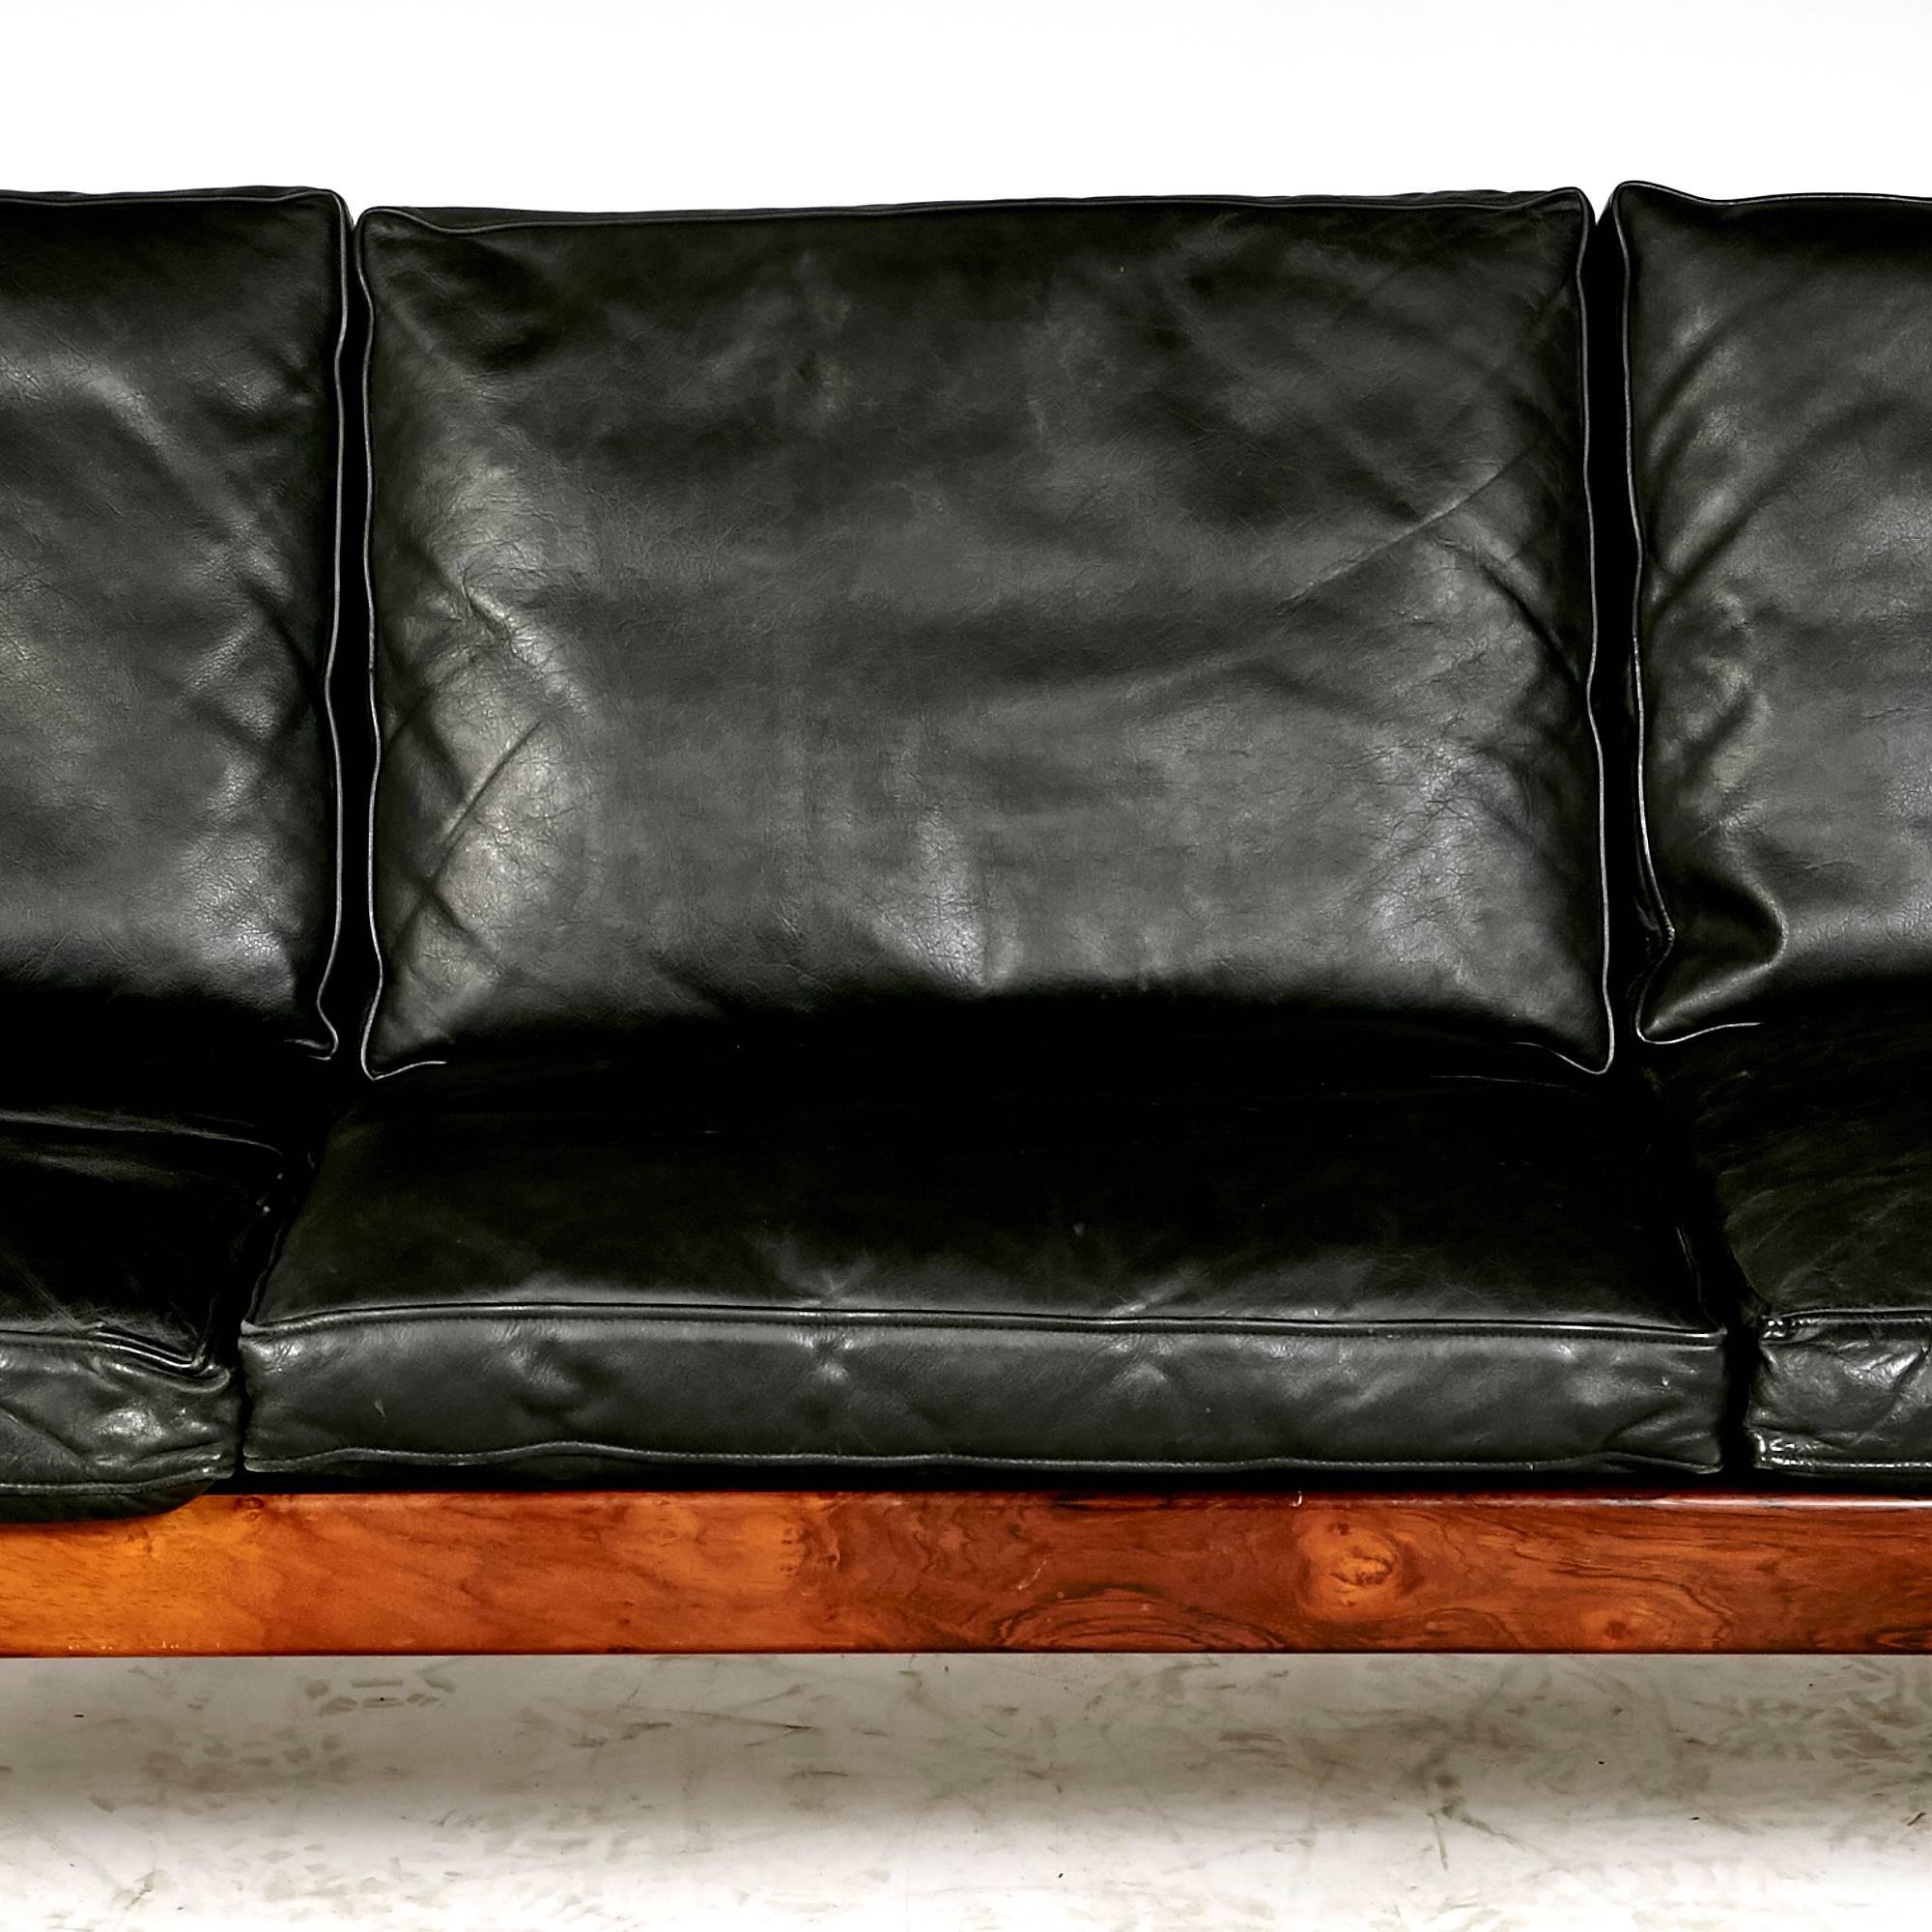 Vintage 1960s Hans J. Wegner for AP Stolen Denmark three-seat sofa AP62/3 in black leather and Brazilian rosewood. Beautiful rosewood design and details. Excellent condition. Unmarked.